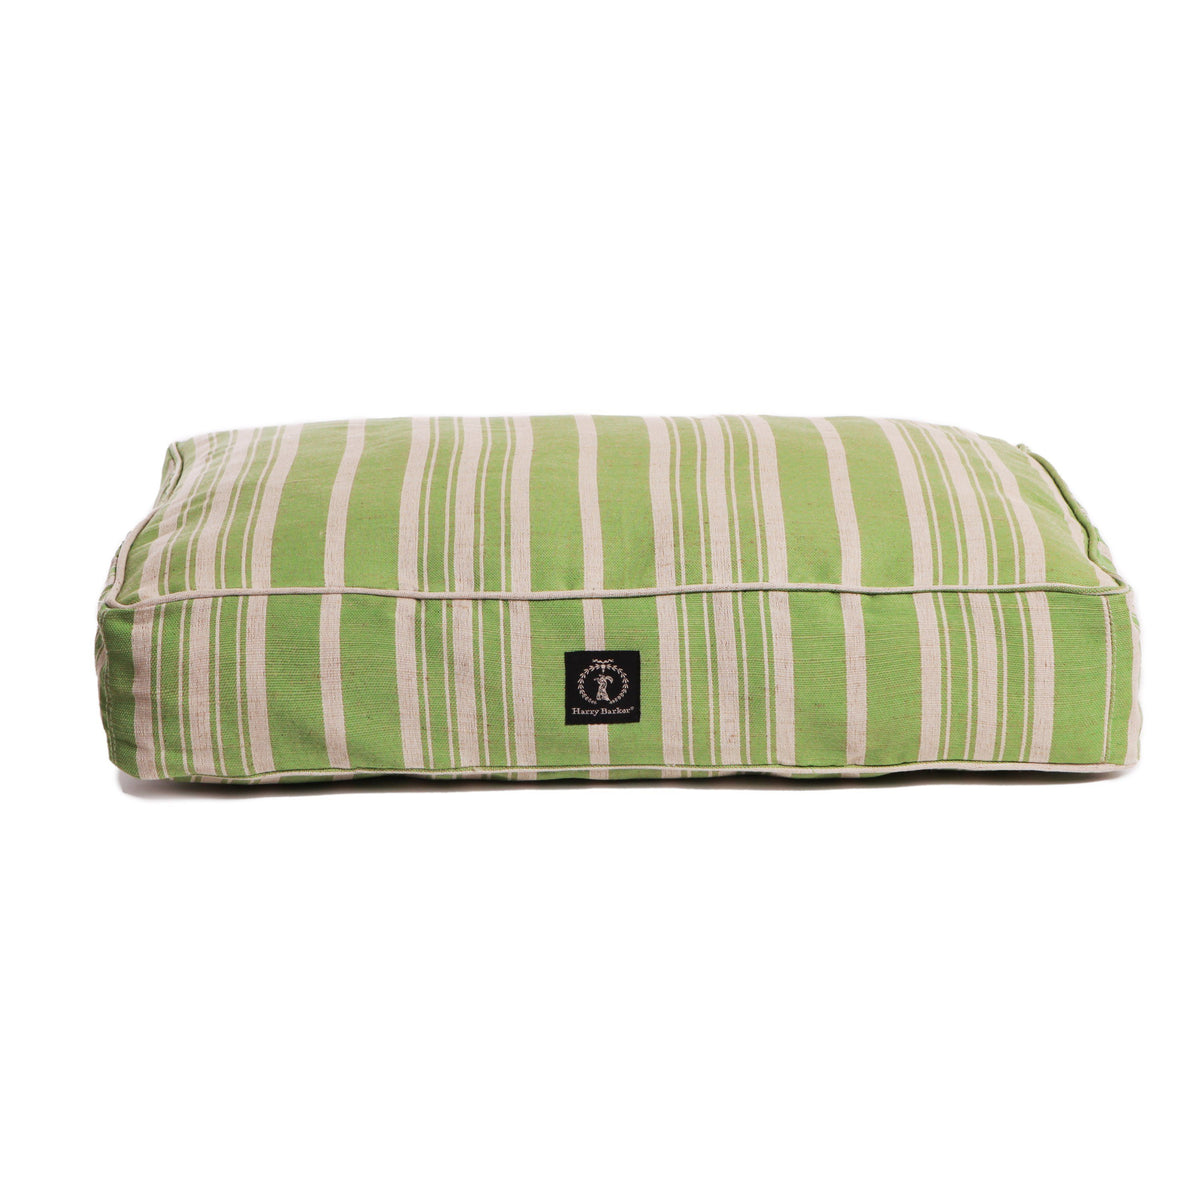 Bed Cover - Classic Stripe Rectangle Dog Bed Cover